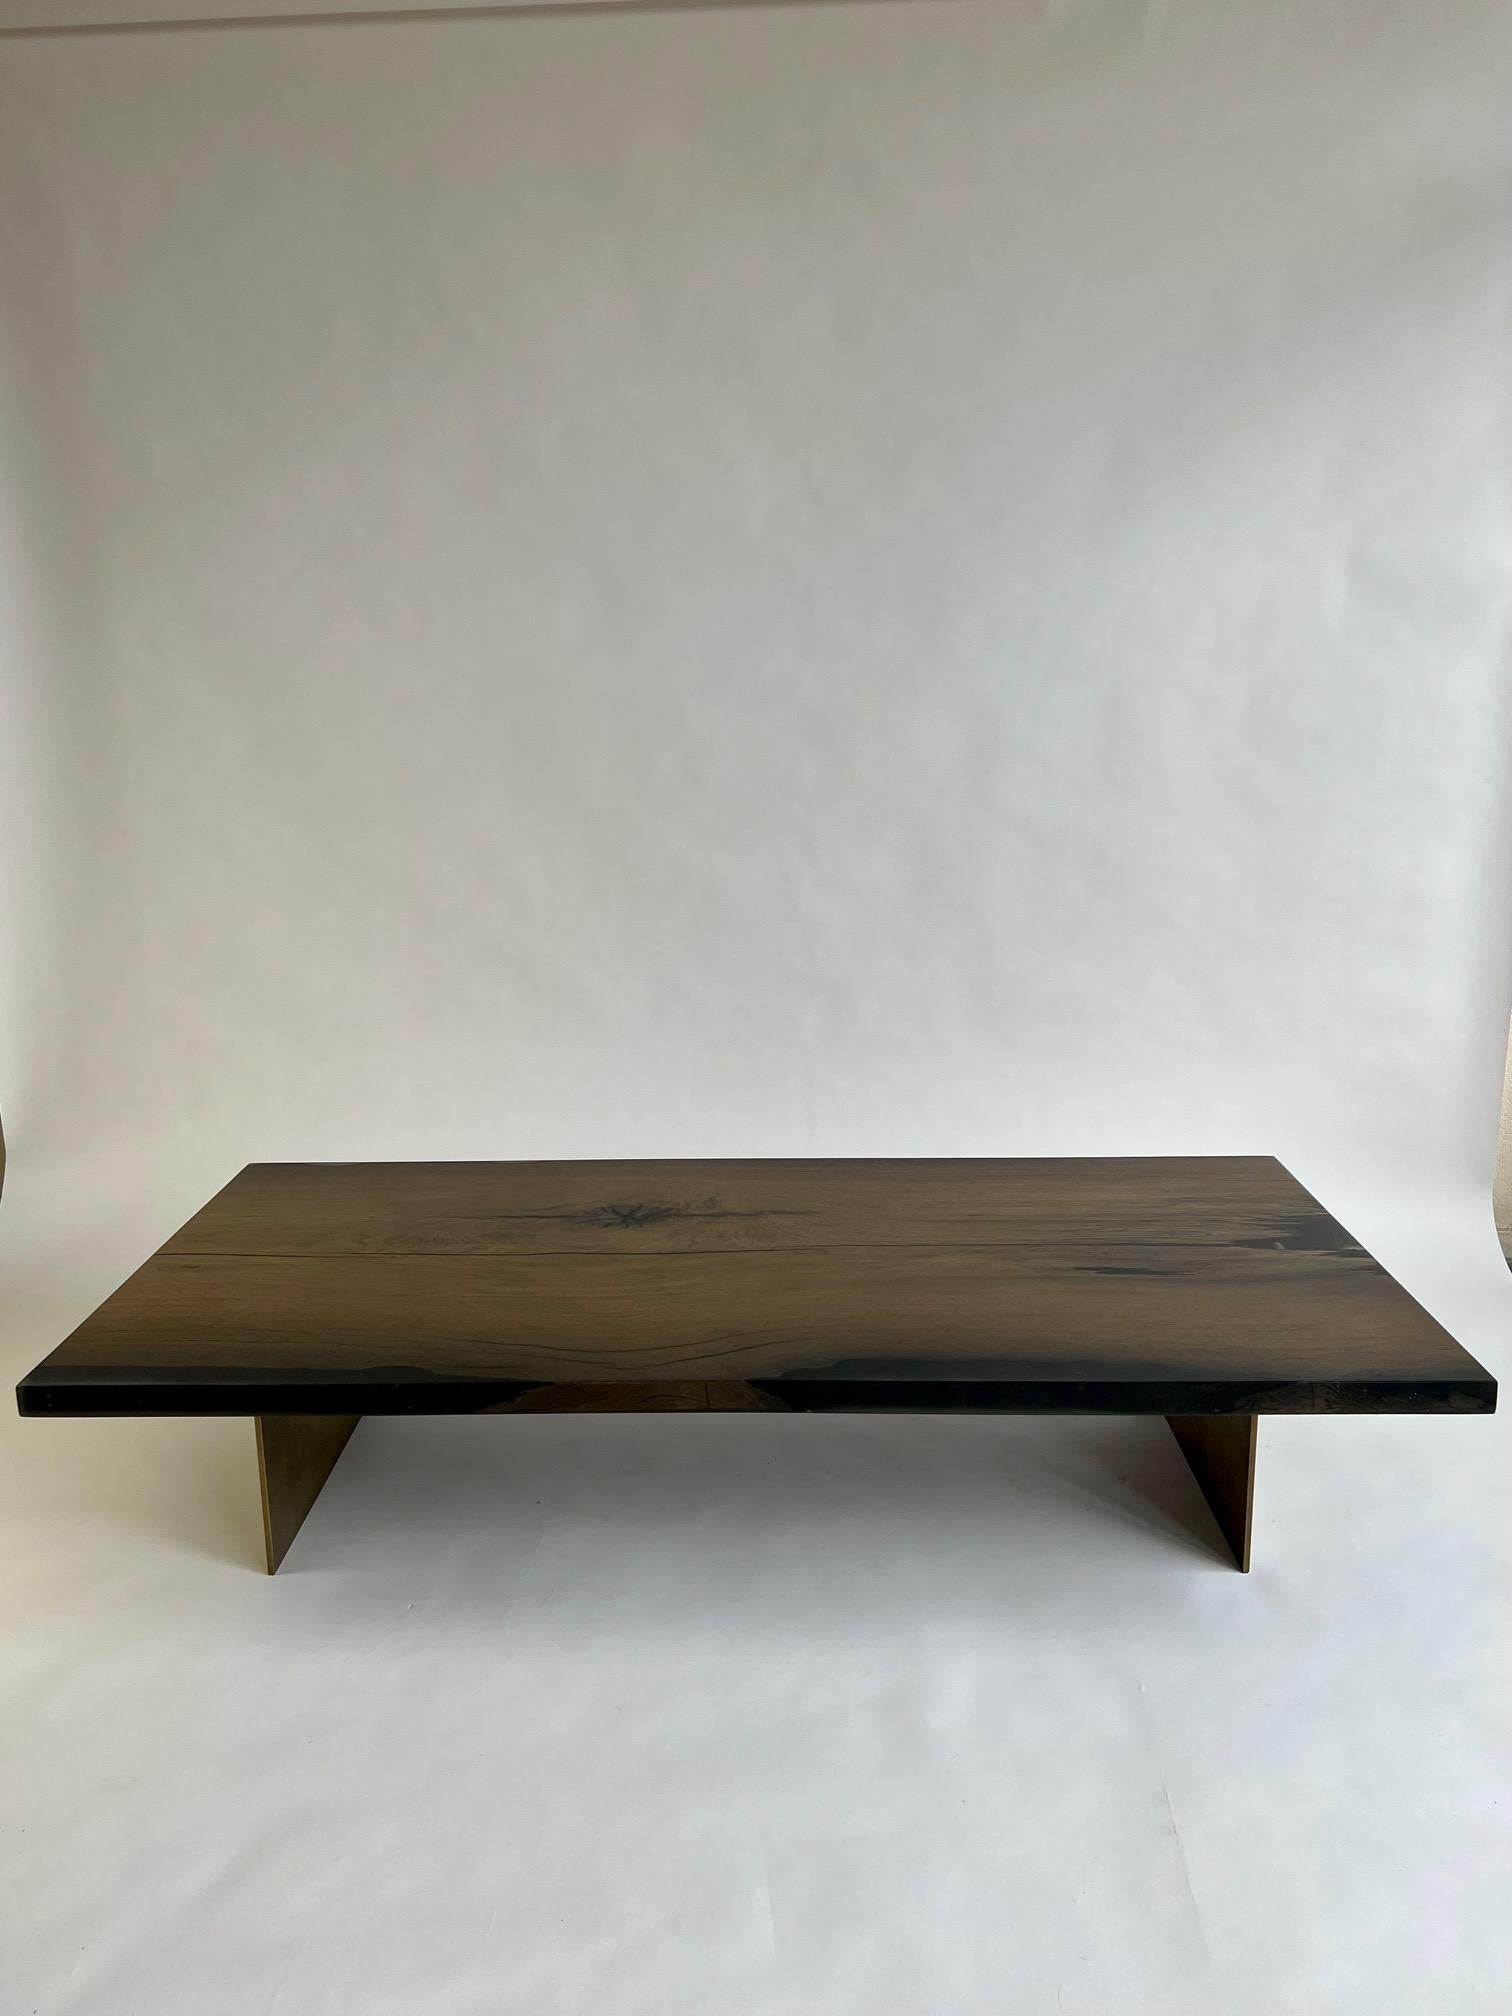 Introducing an extraordinary coffee table crafted from ancient Bog Oak and durable epoxy resin. This remarkable piece is made from wood that is an astonishing 7,000 years old, sourced from Romania. The wood's exceptional preservation can be